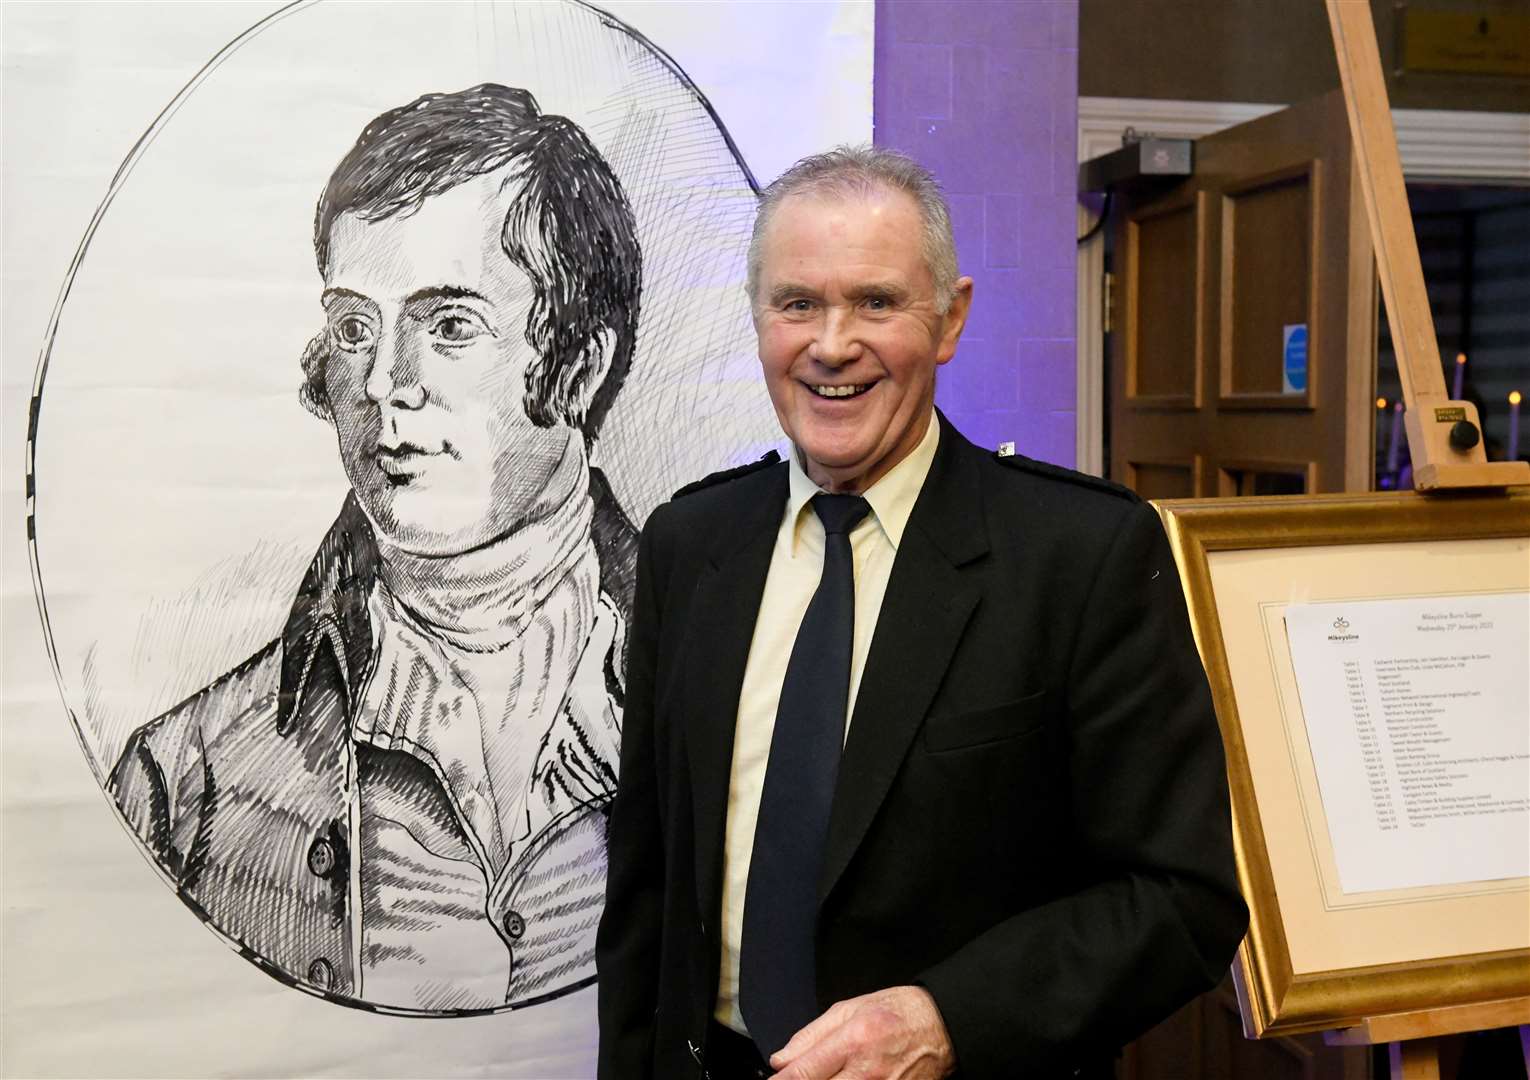 David Ewan drew the Rabbie Burns image that greeted everyone on their way in. Picture: James Mackenzie.